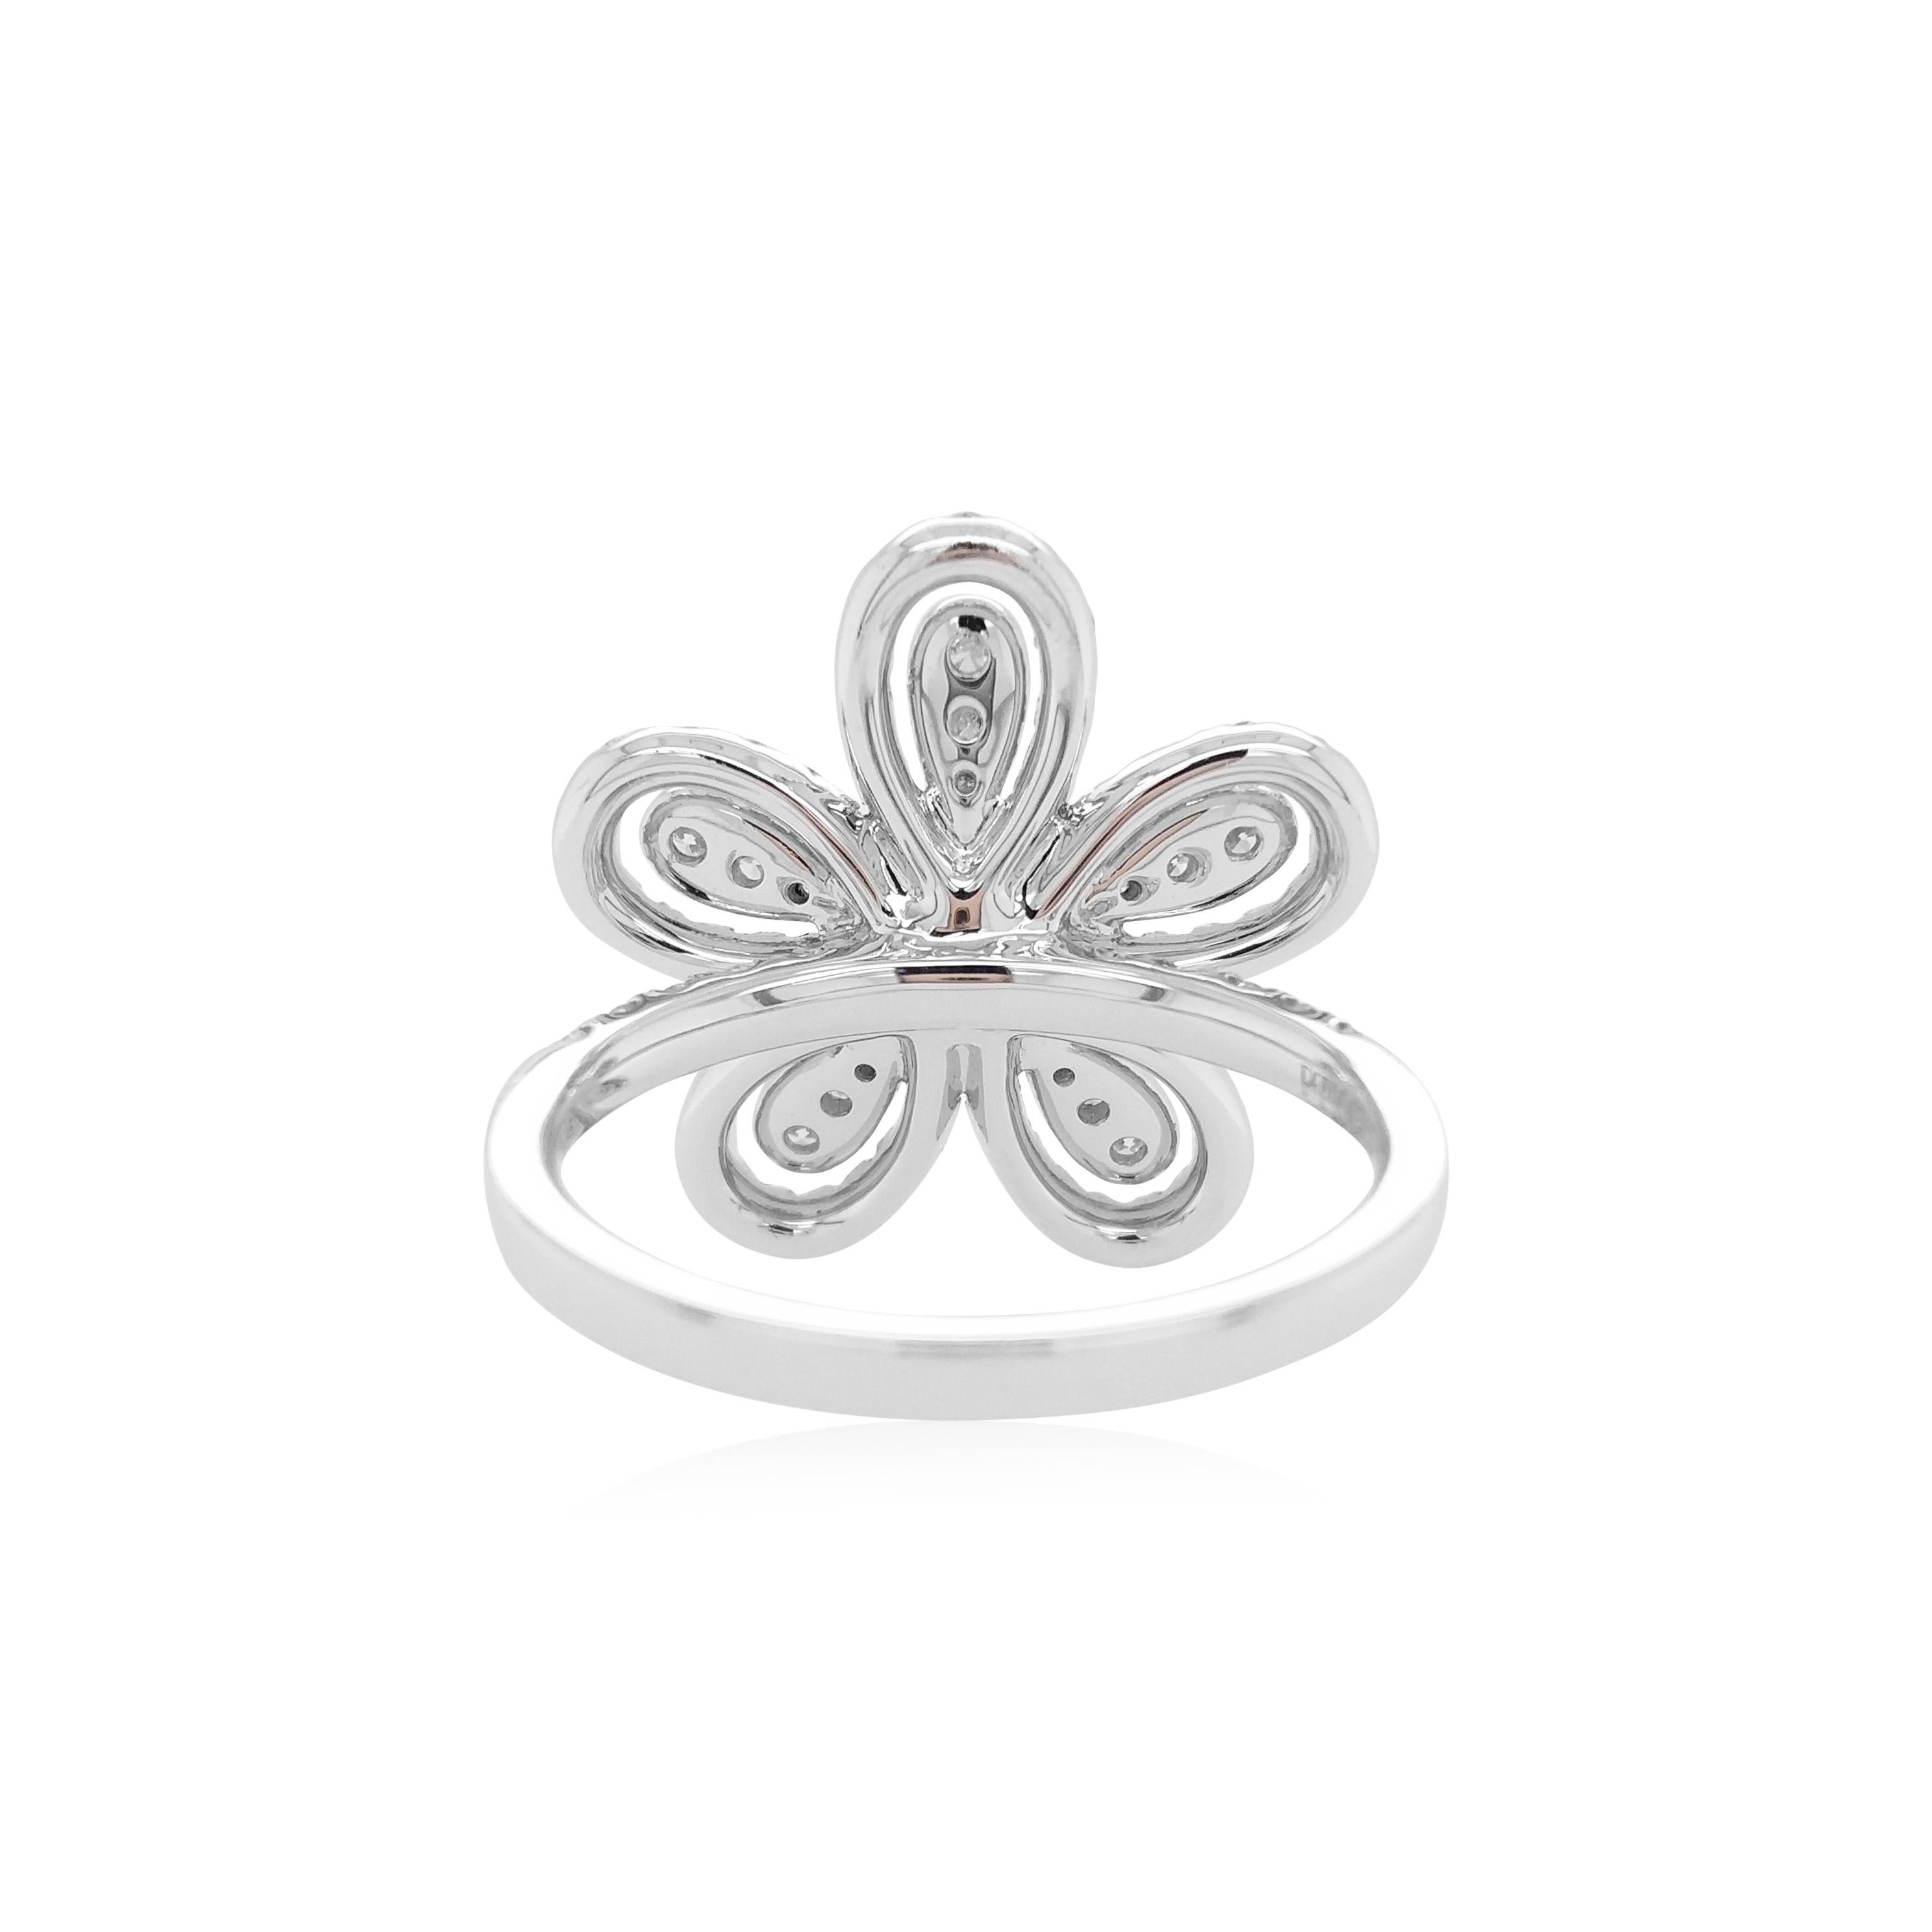 This unique flower shaped ring features striking Yellow diamonds at the heart of the design. The rich colour of these diamonds is complimented perfectly by the delicate platinum floral design which completed by a combination of glistening white